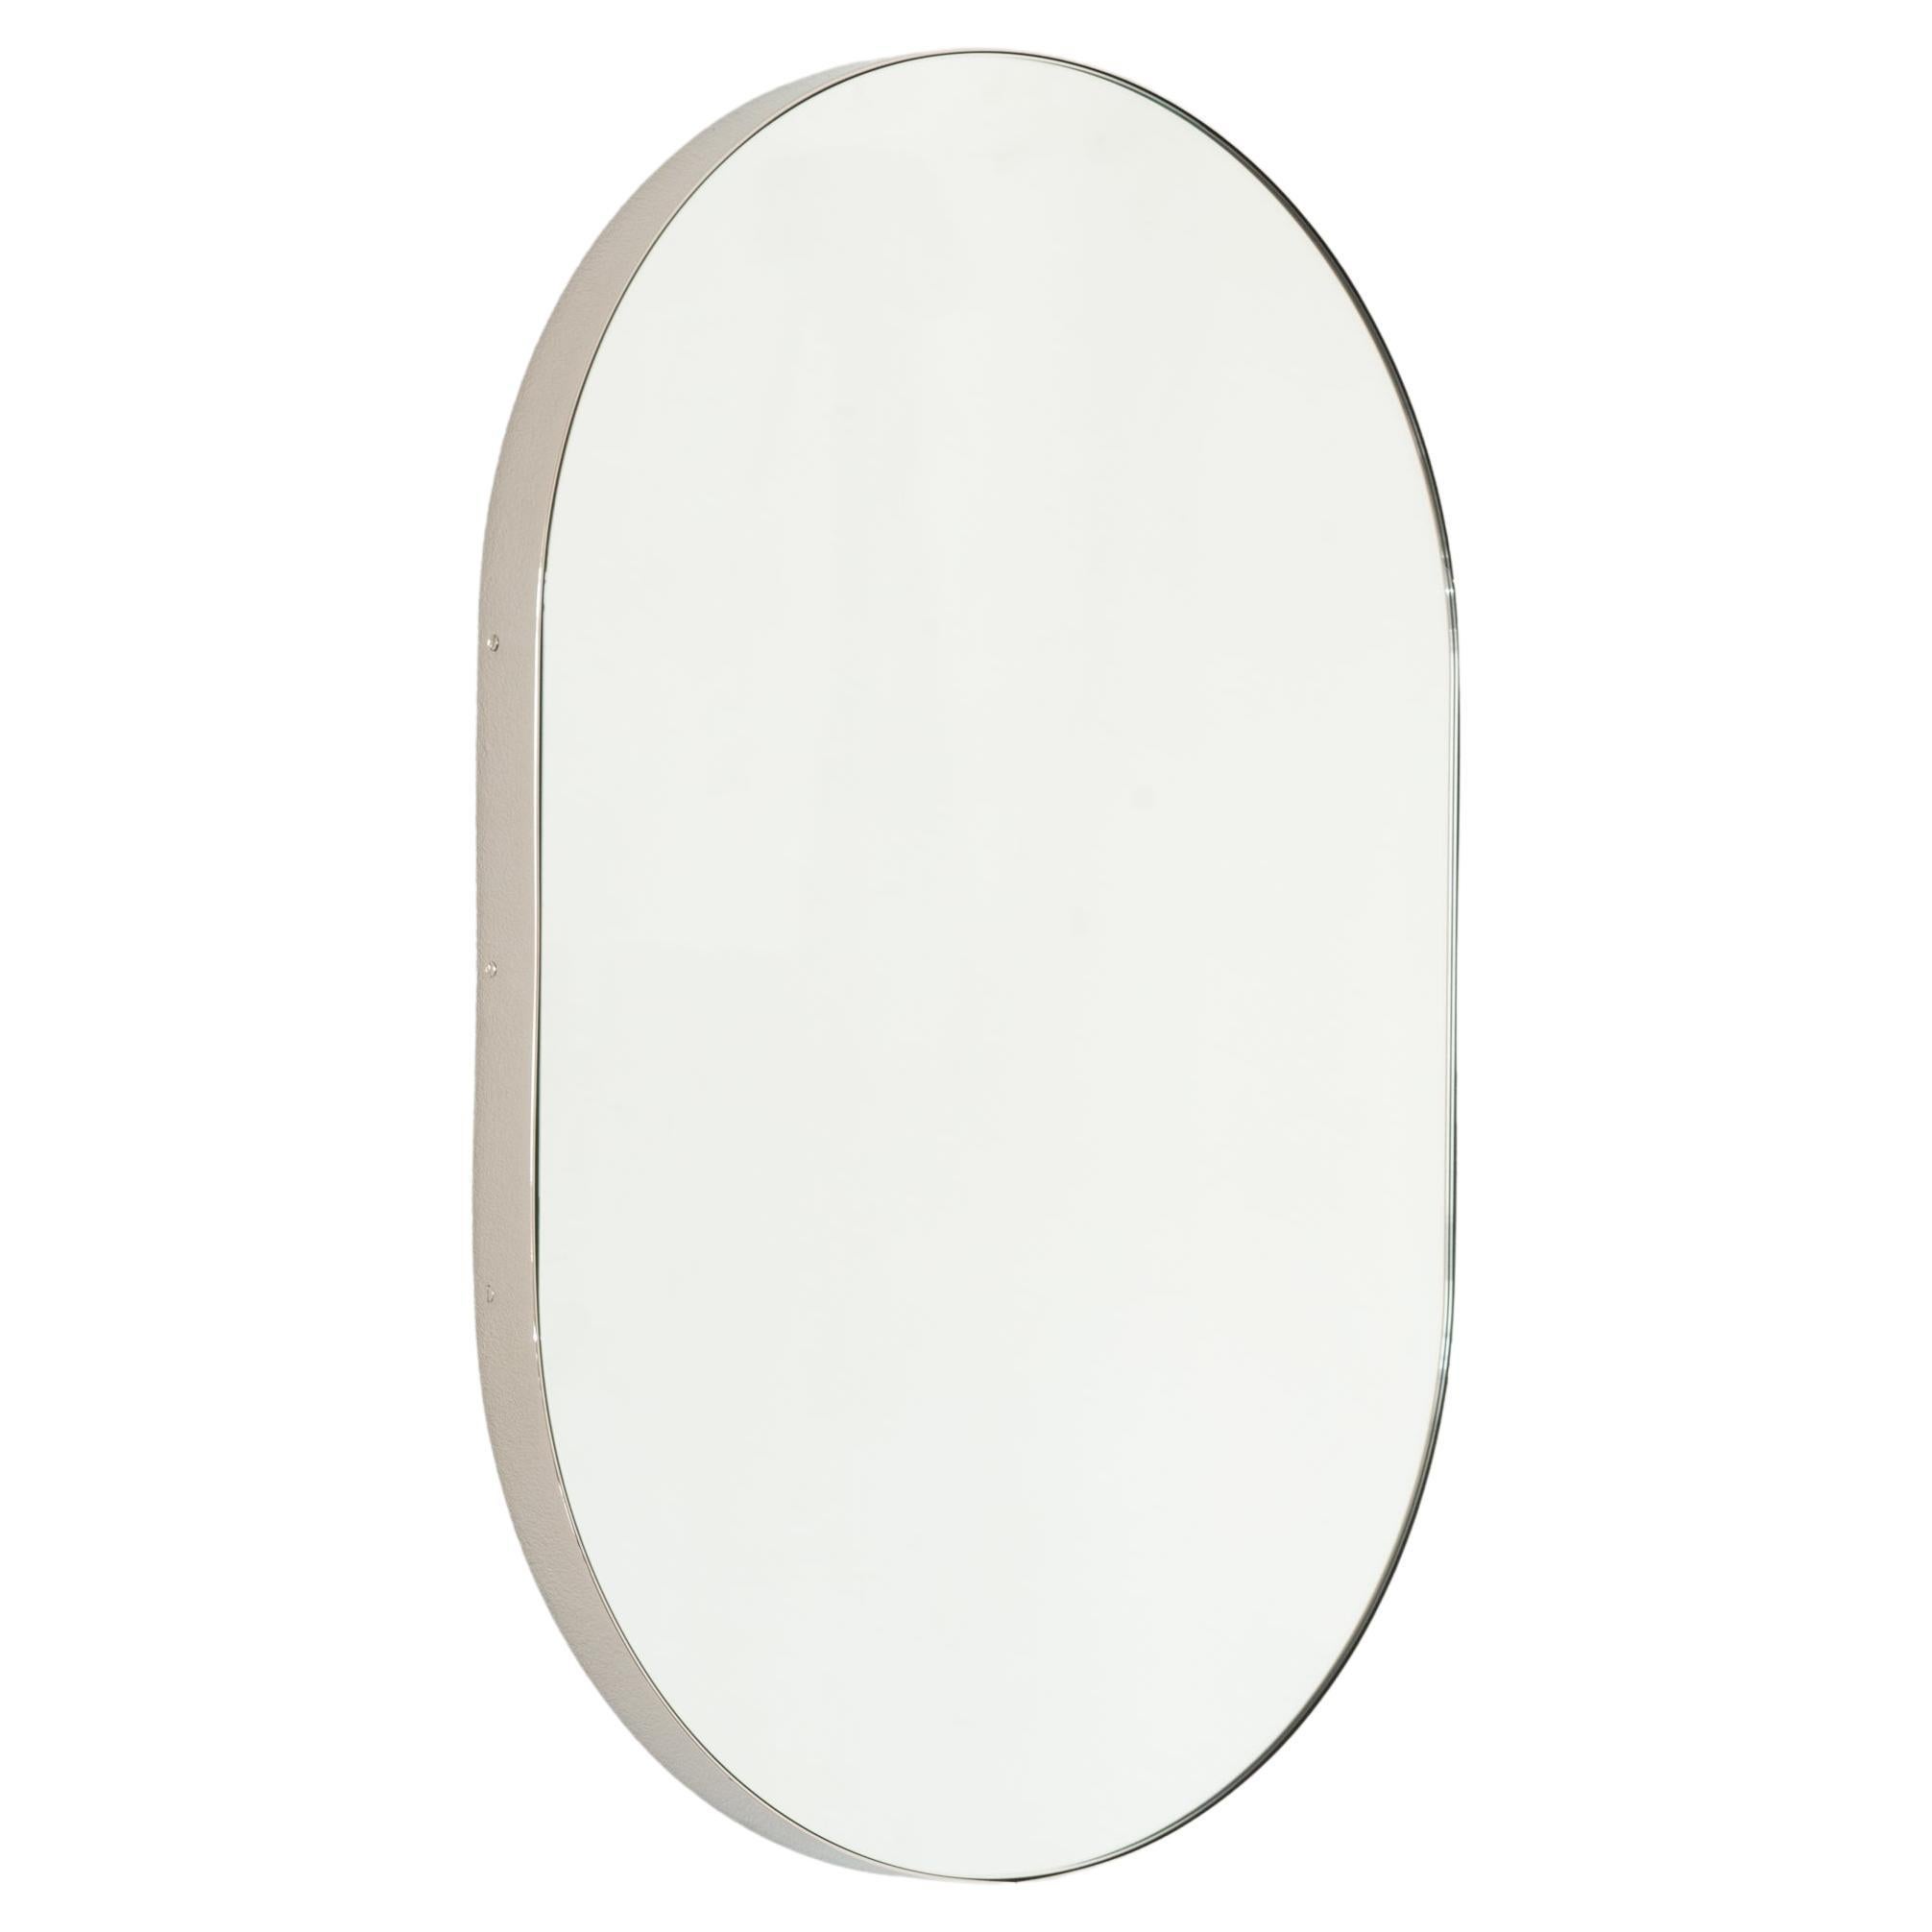 Capsula Pill Shaped Modern Mirror with Nickel Plated Frame, Medium